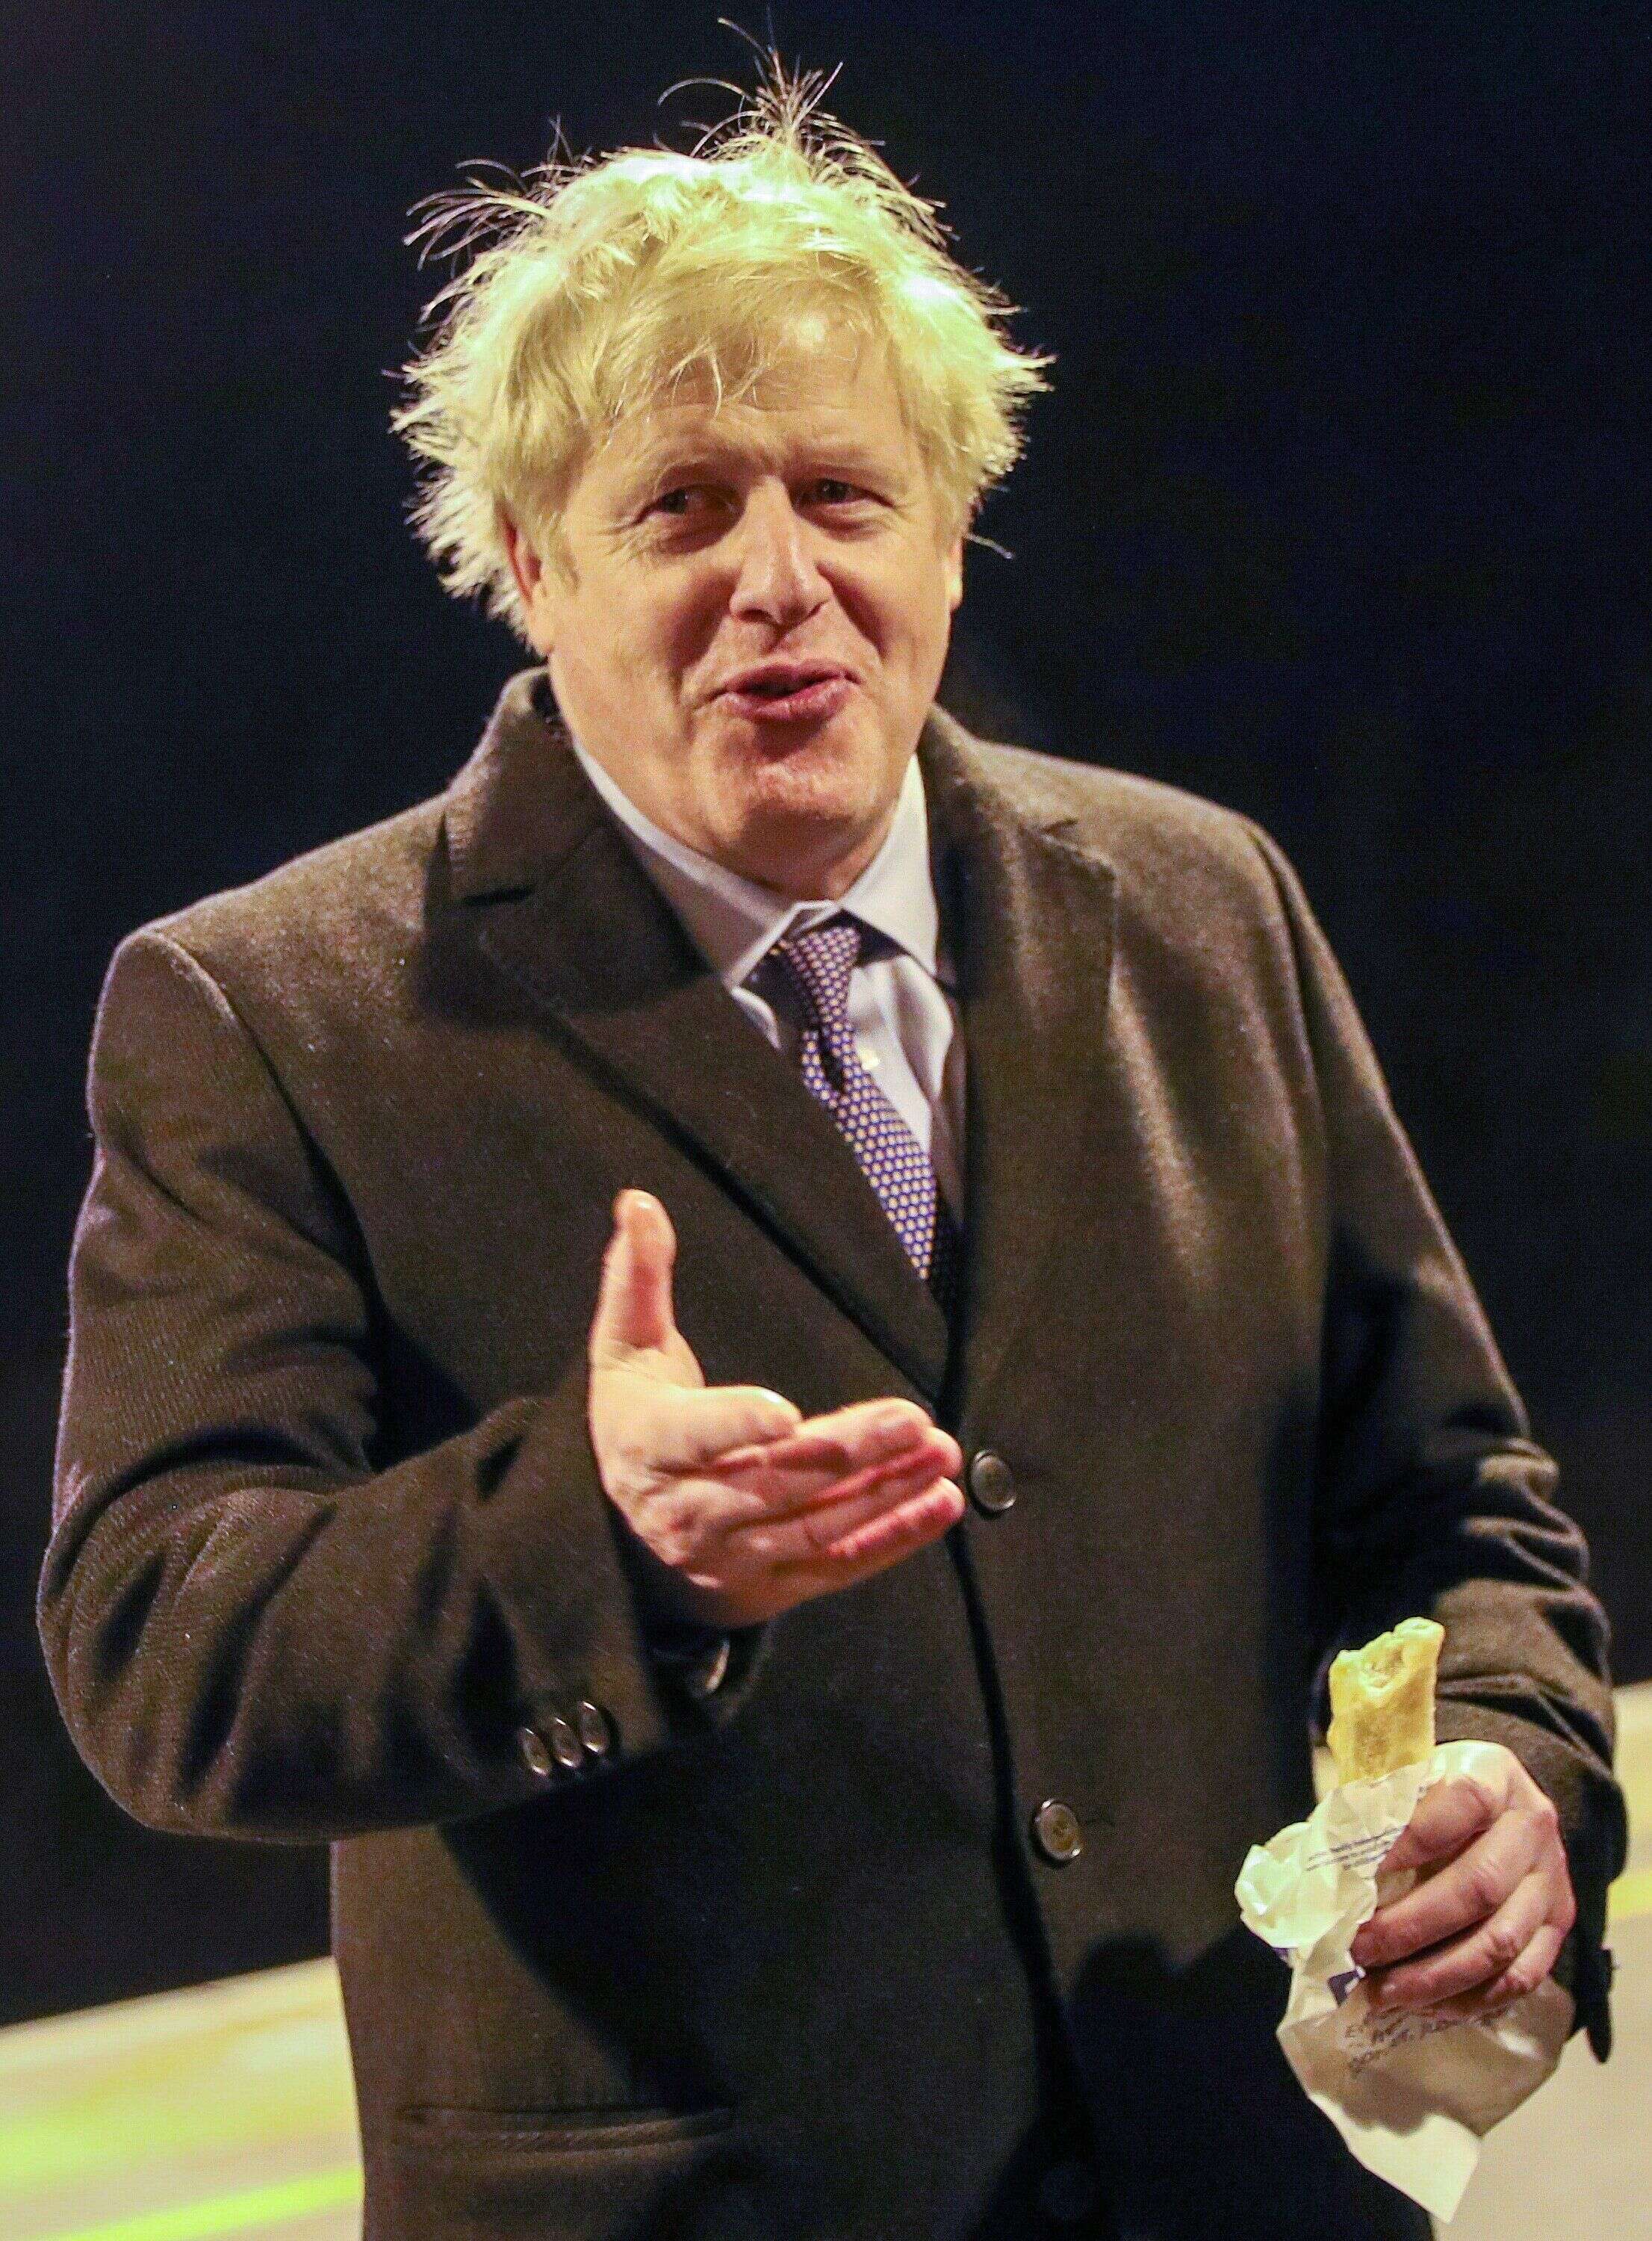 Britain's Prime Minister Boris Johnson gestures as he holds a 